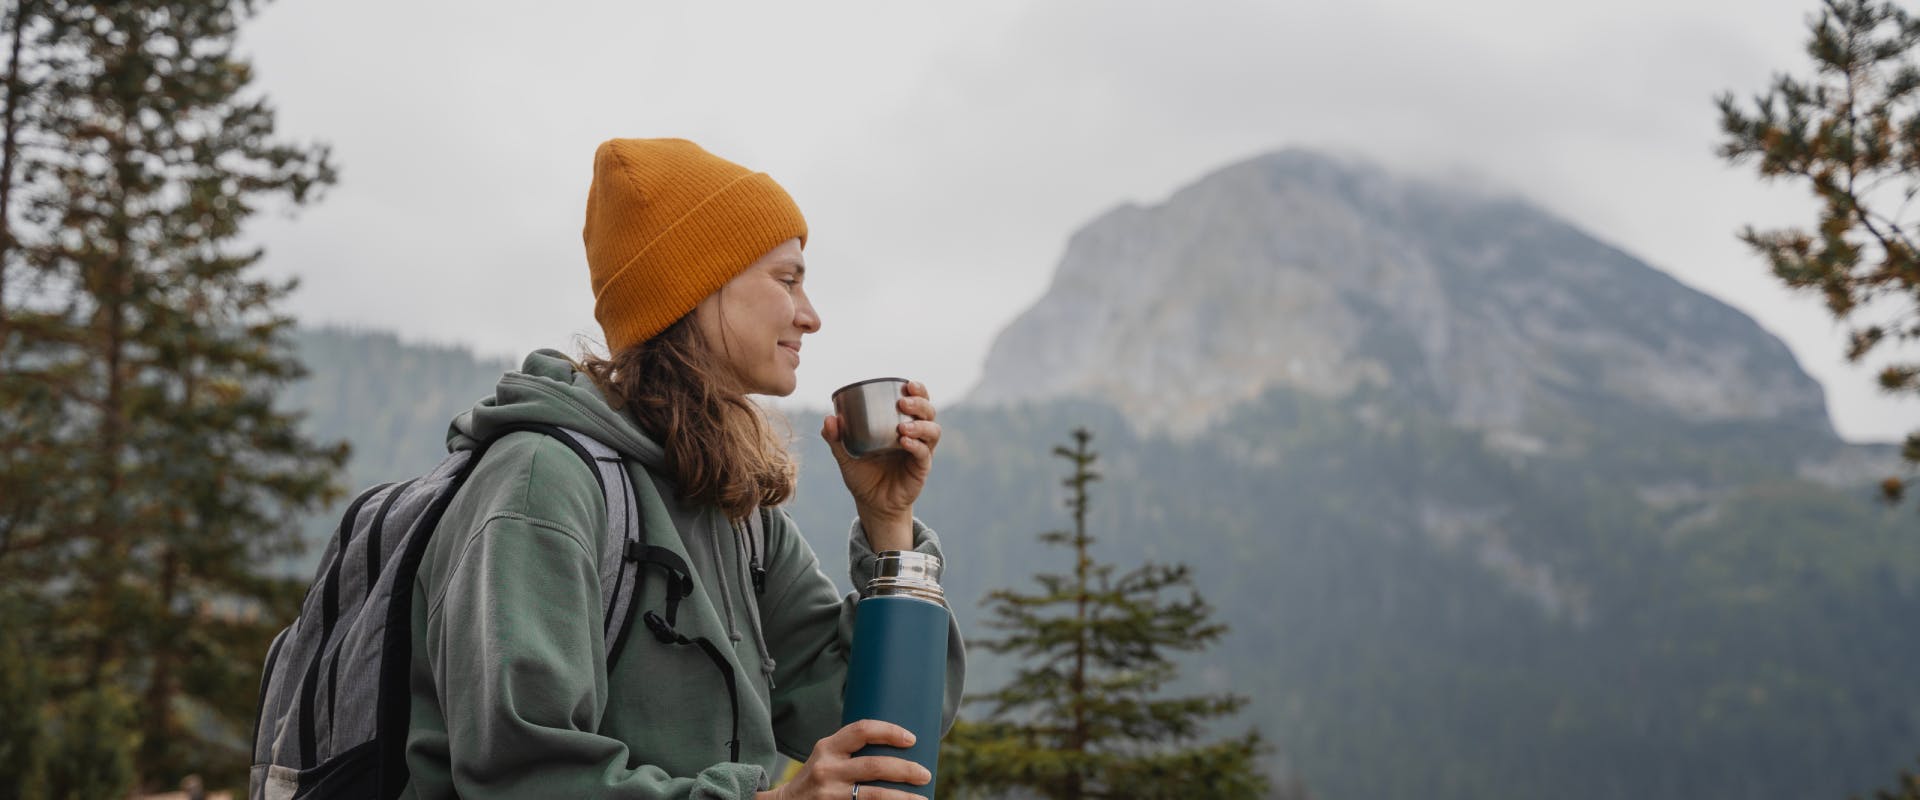 solo female traveler enjoying a warm drink on a solo camping mountain trip